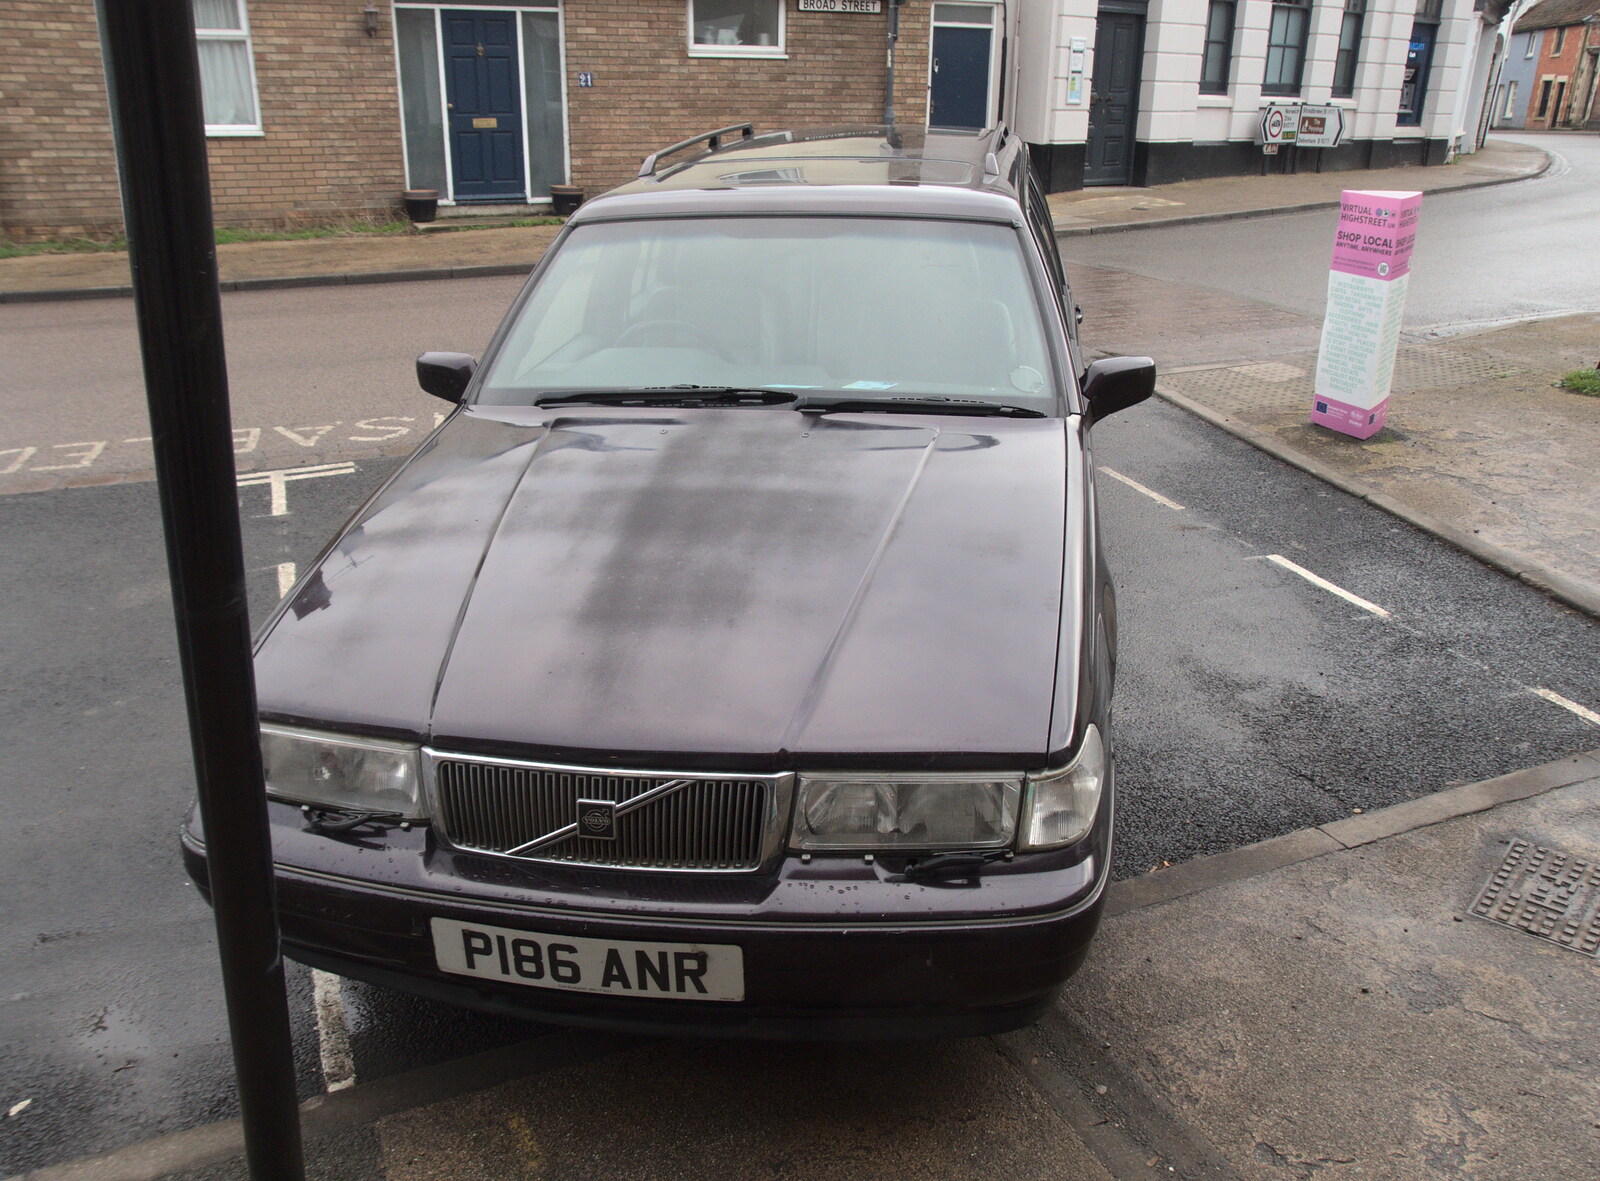 Quality parking in Eye from The Lost Pubs of Norwich, Norfolk - 13th February 2022